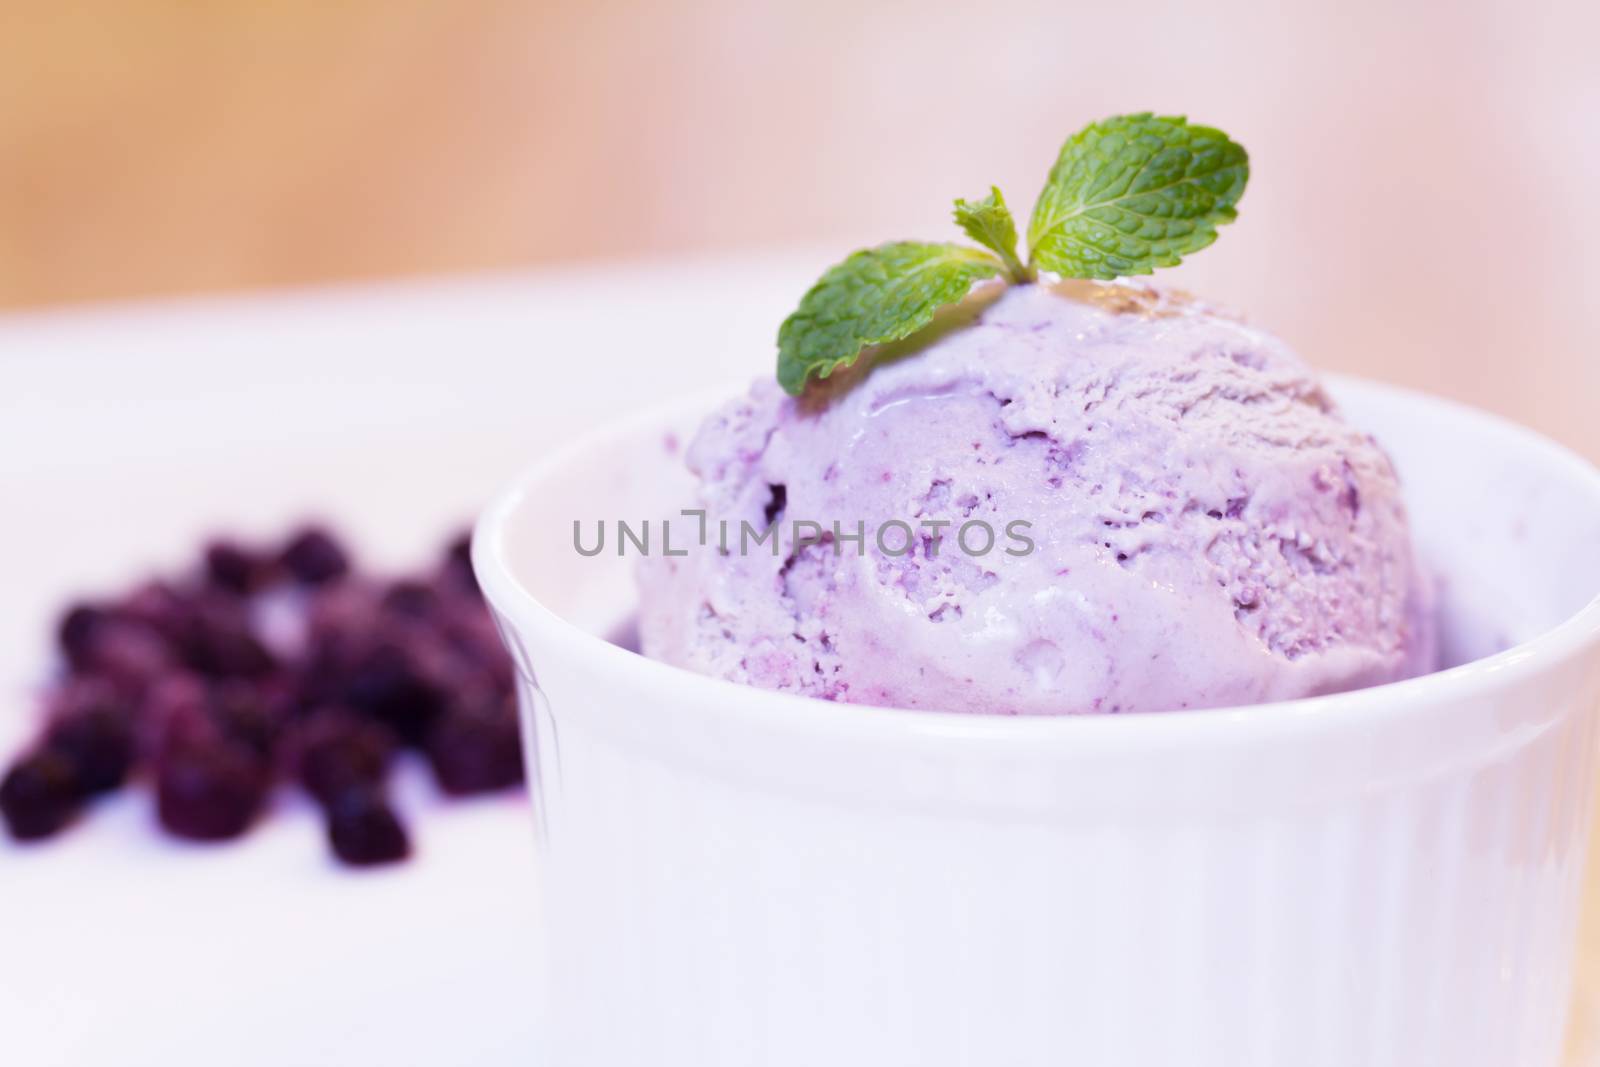 Home made Blue berry ice-cream by wyoosumran